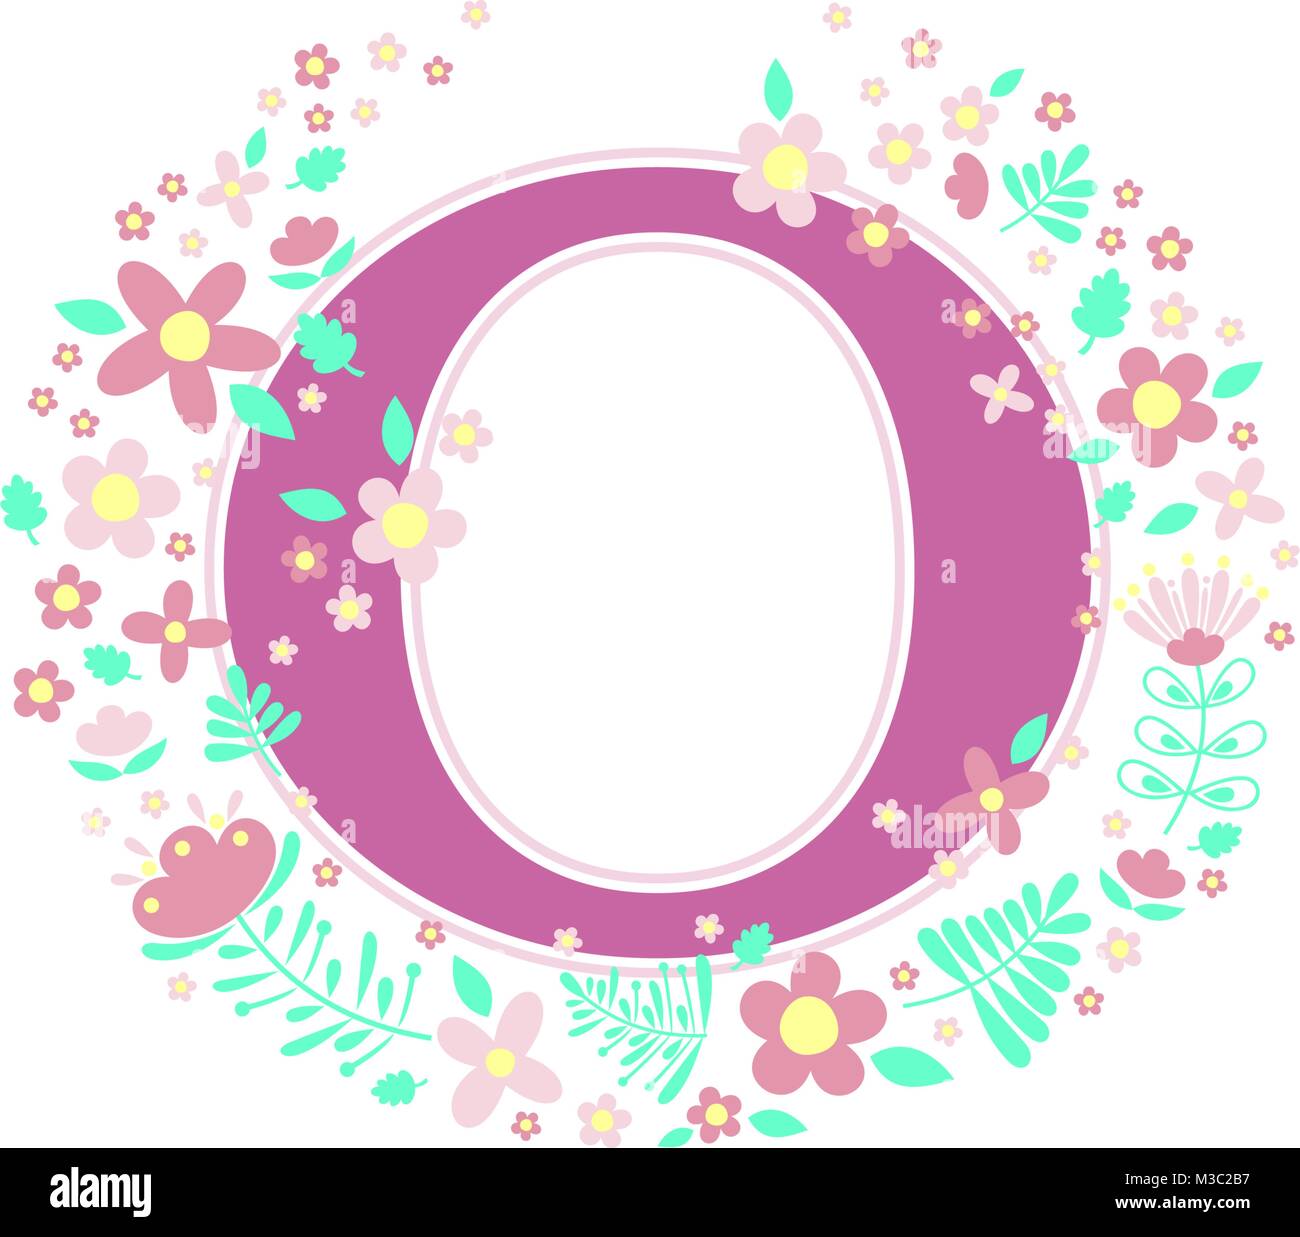 initial letter o with decorative flowers and design elements isolated on white background. can be used for baby name, nursery decoration, spring theme Stock Vector